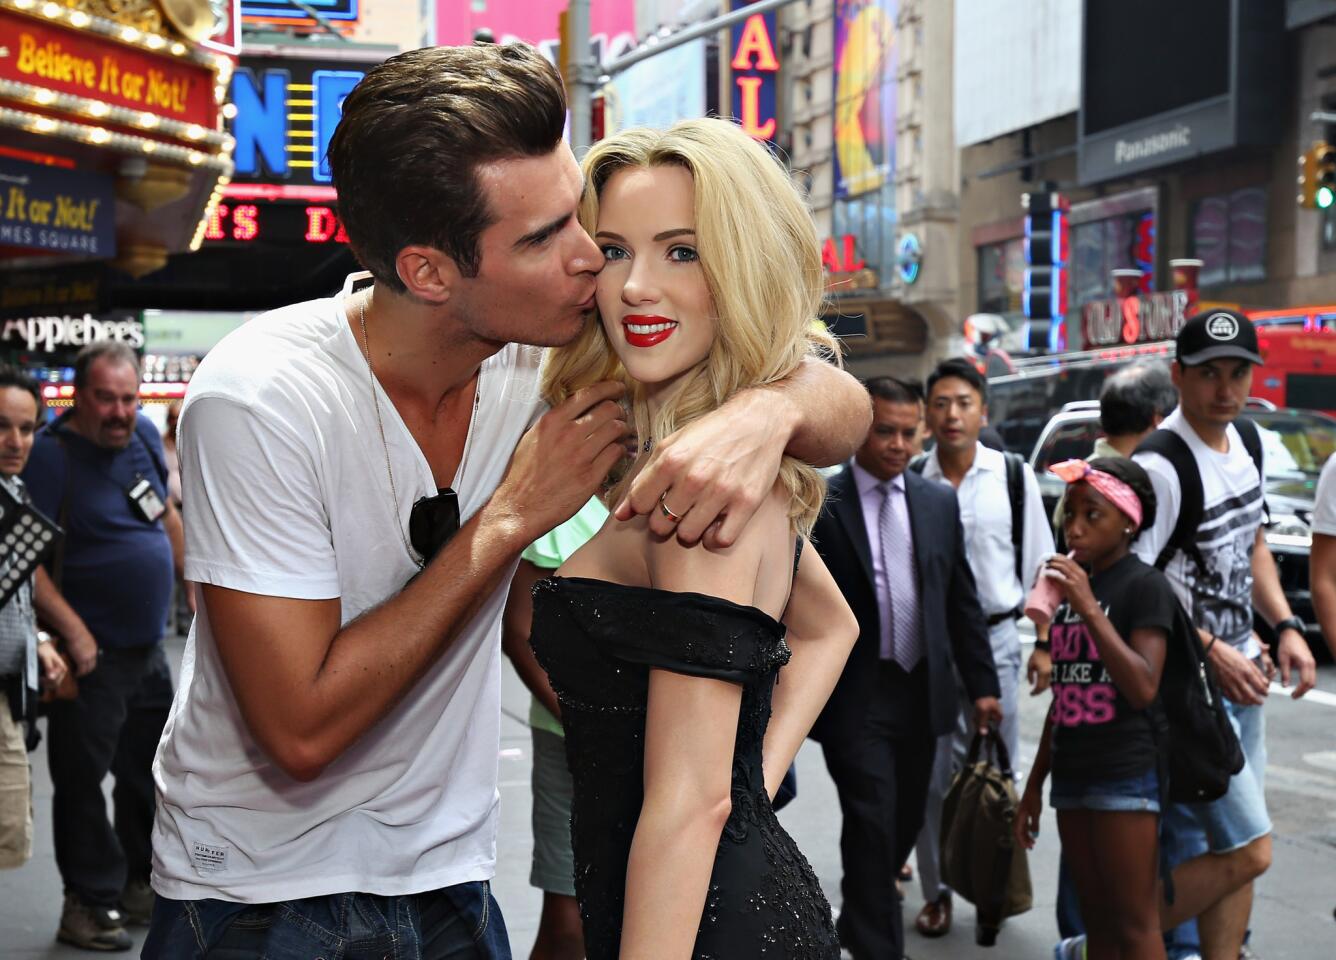 Model Luke Stockman poses with Madame Tussauds New York first-ever wax figure of actress Scarlett Johansson in New York City.